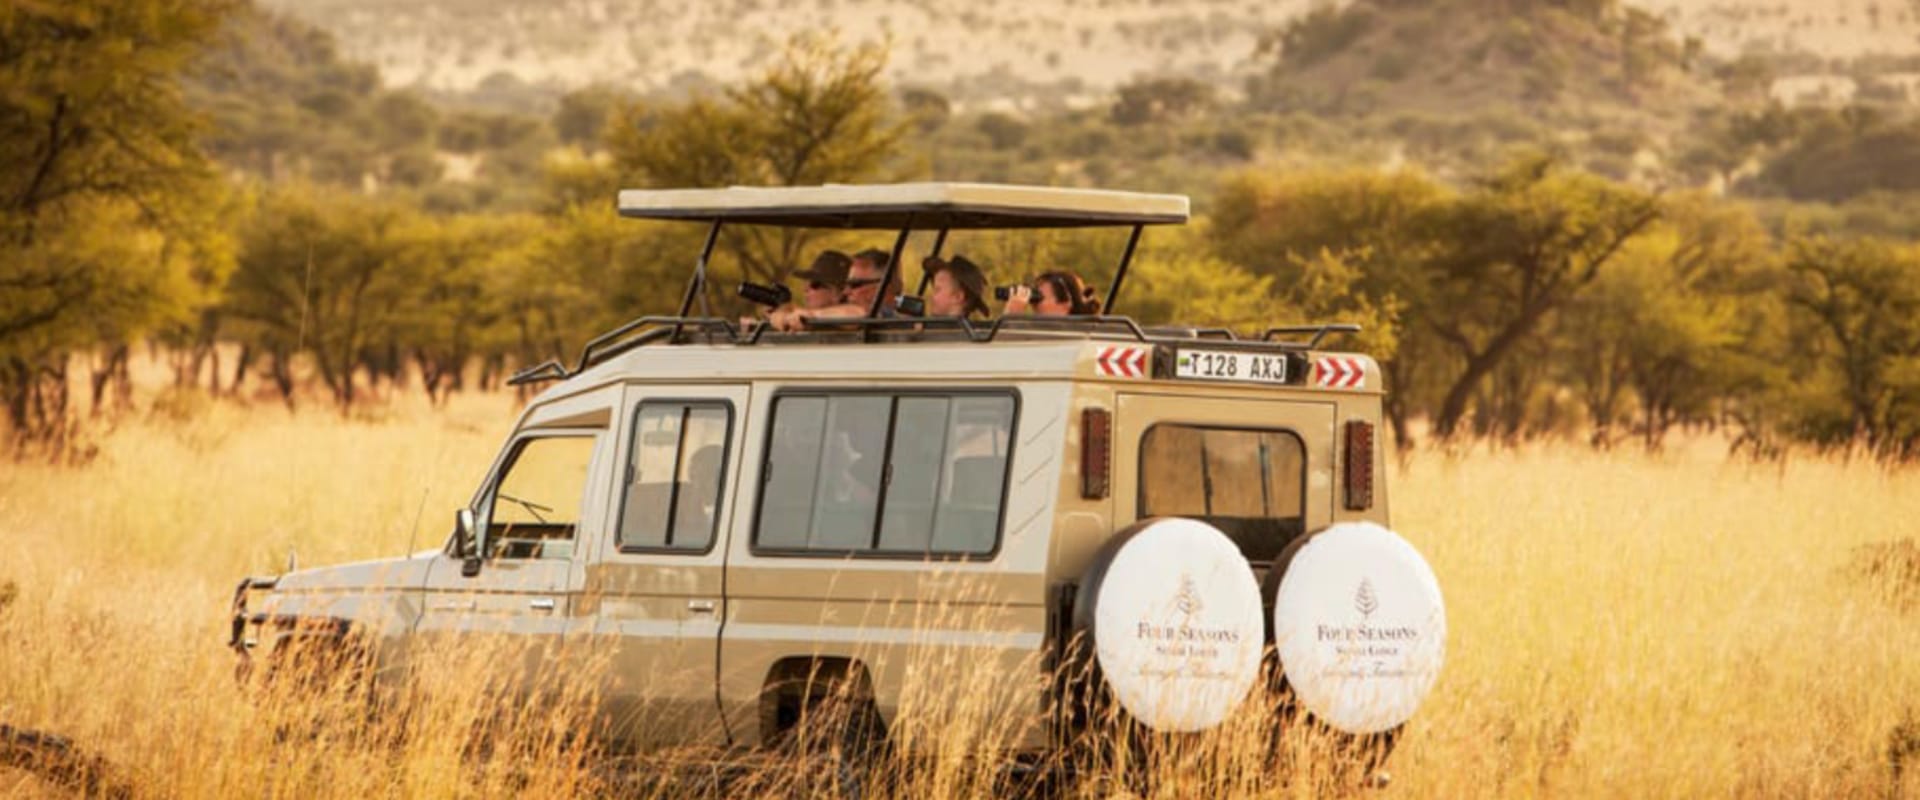 Witness the Great Migration on an exciting game drive